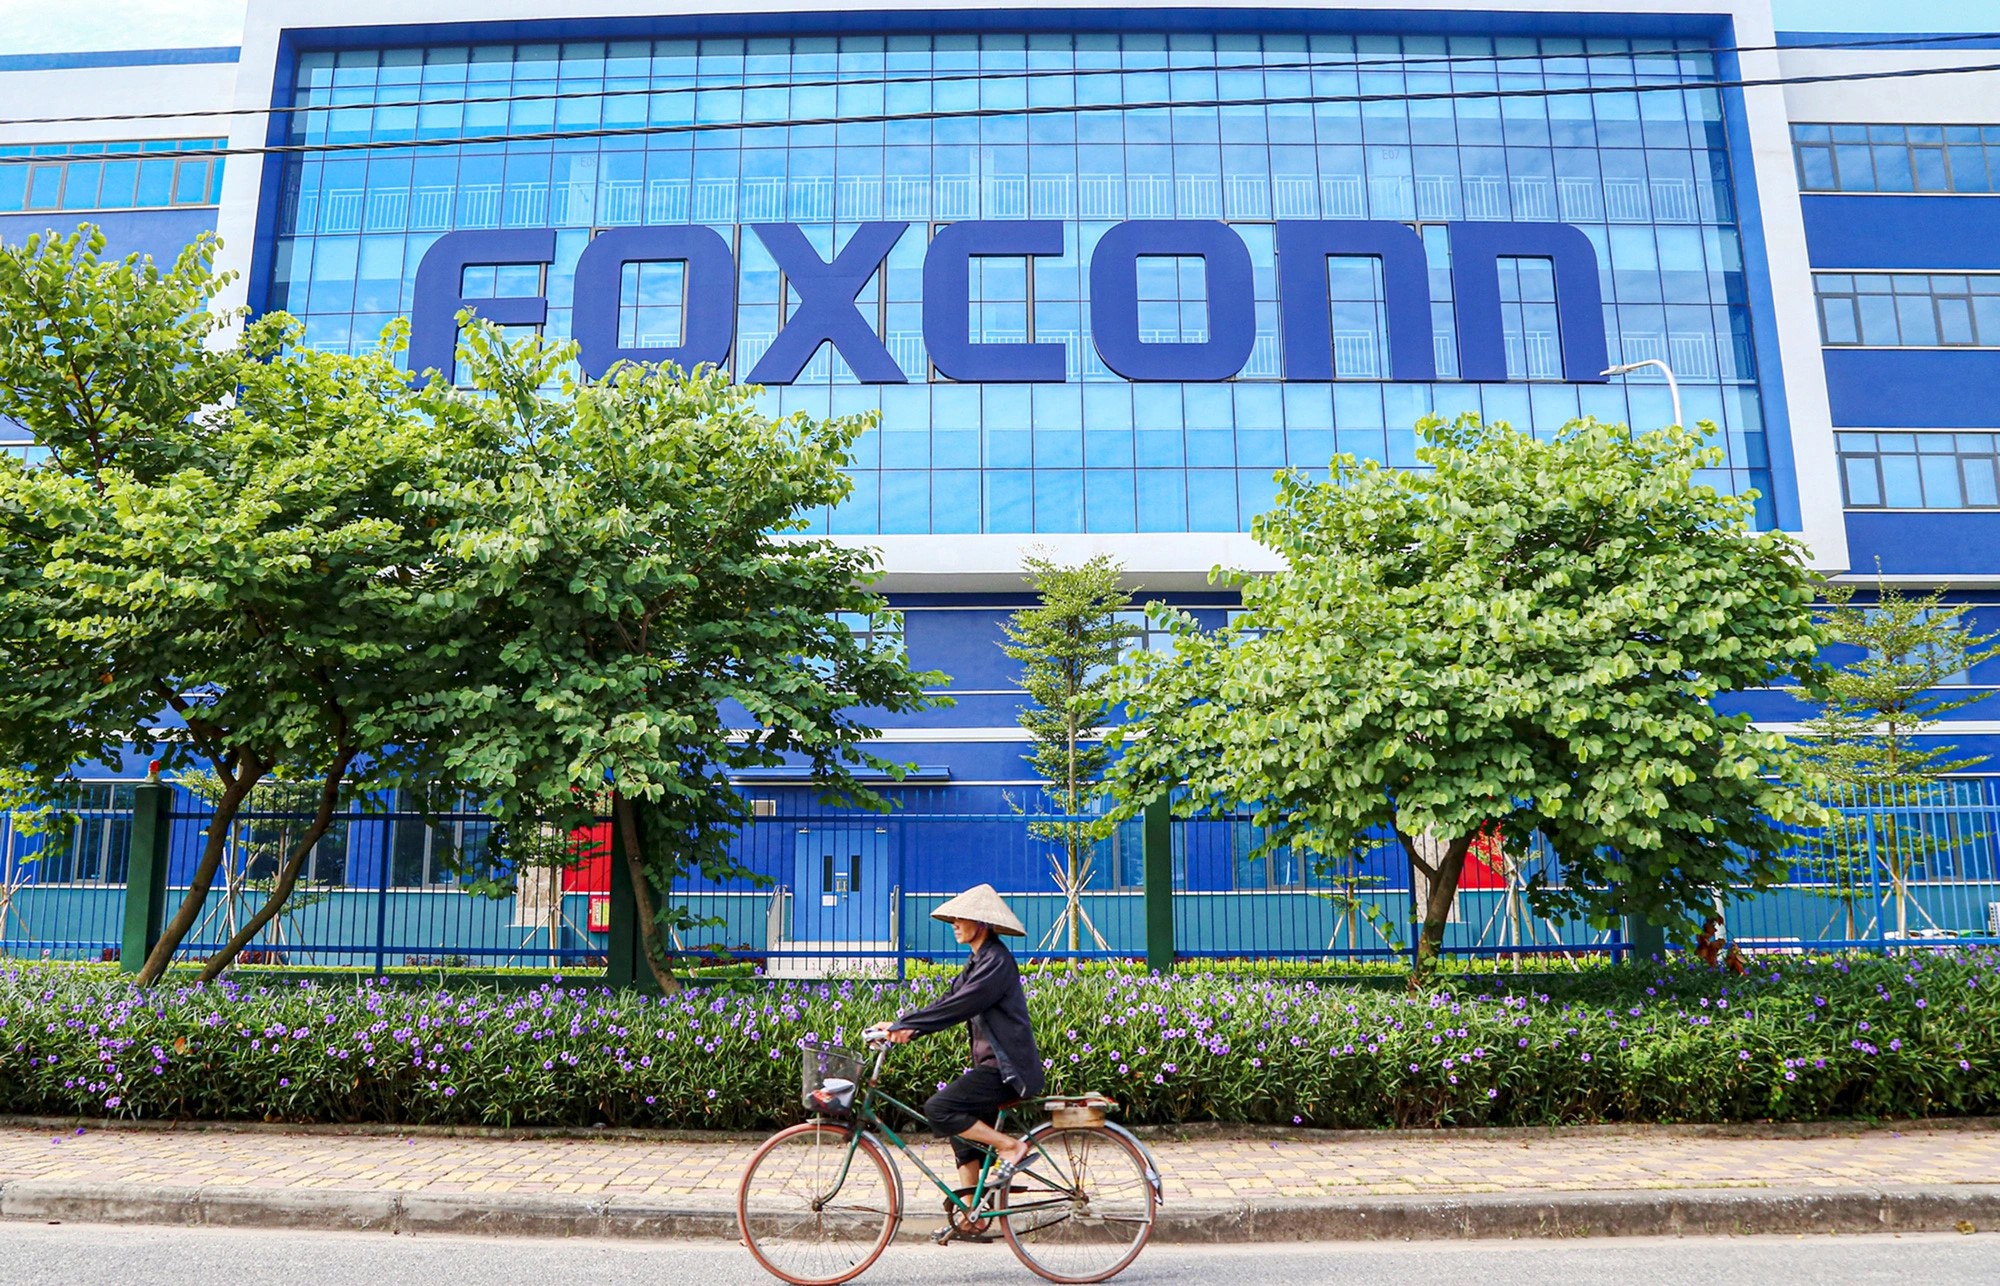 Standing prominently in Bac Giang Province, the Foxconn Hong Hai plant, a global partner of Apple, symbolizes Vietnam's burgeoning role in the semiconductor industry. Photo: Ha Quan / Tuoi Tre.